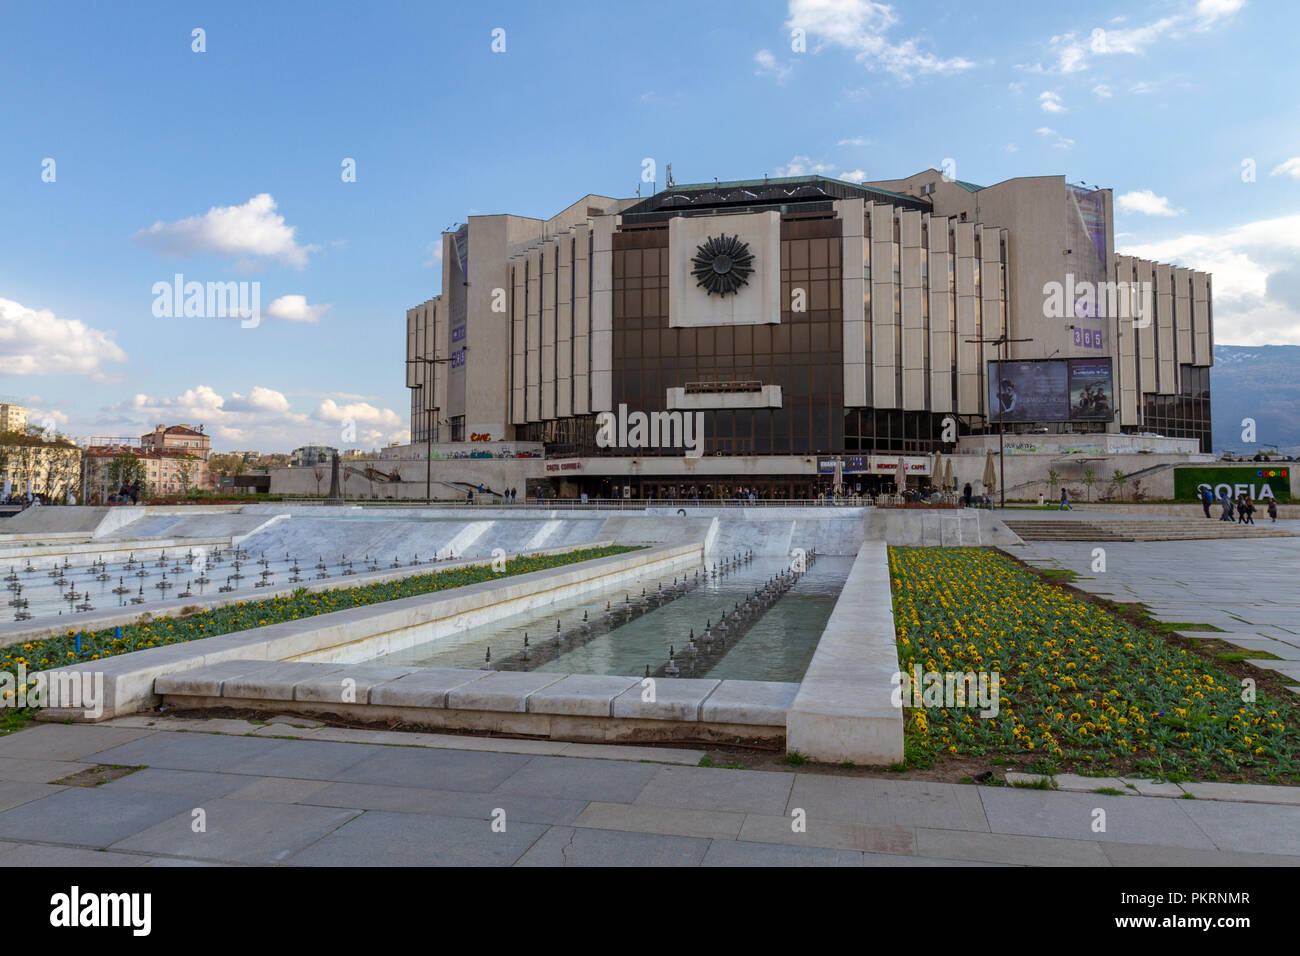 National Palace of Culture in the National Palace Of Culture Park, Sofia, Bulgaria. Stock Photo